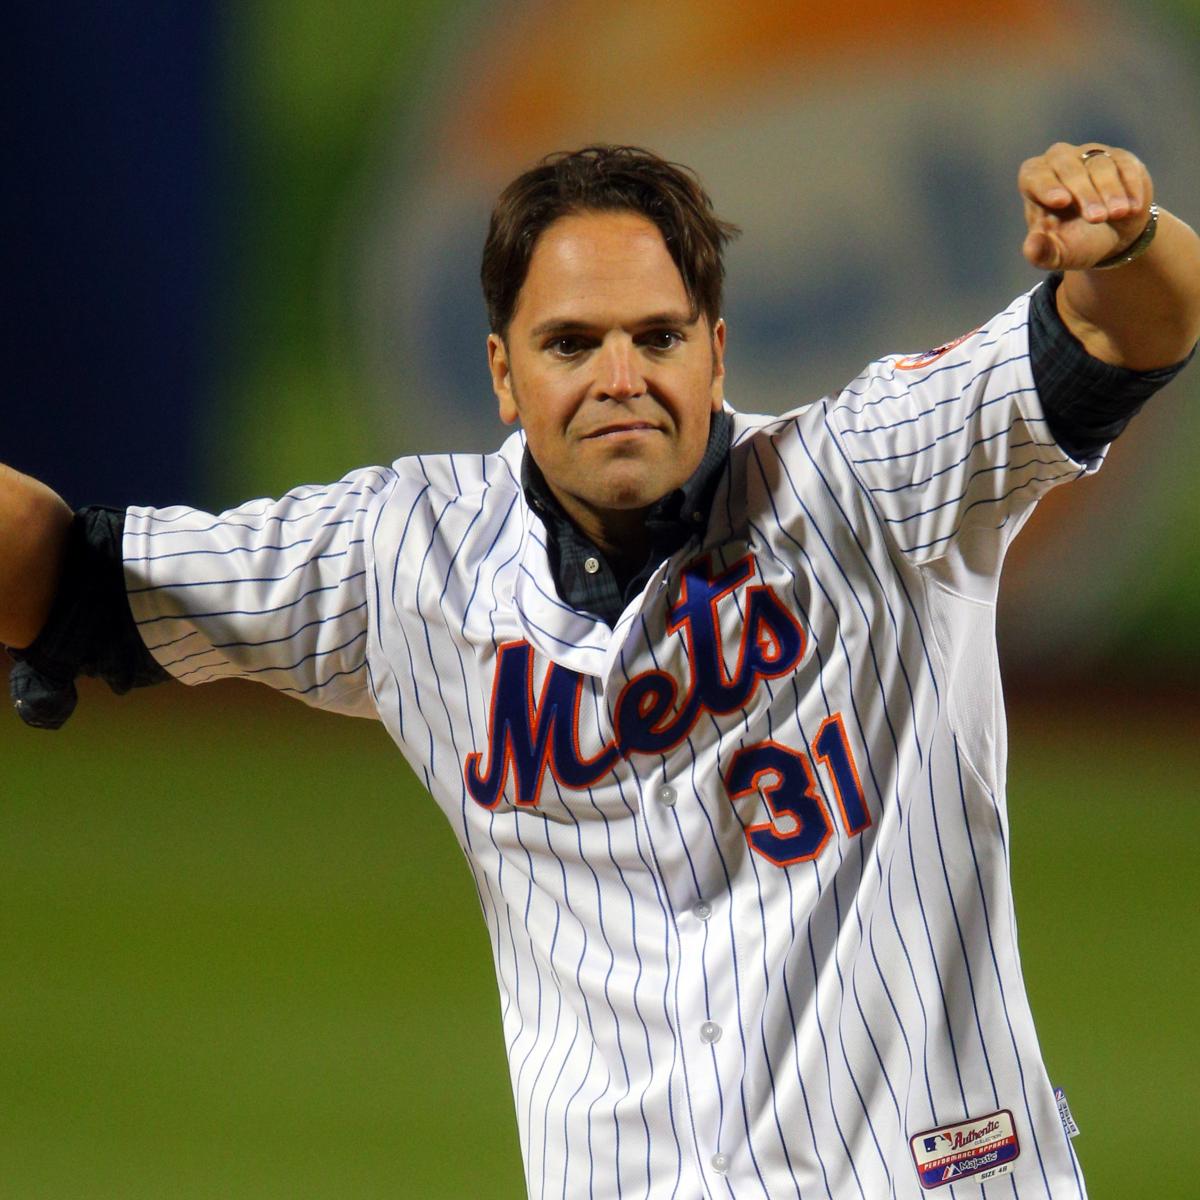 New York Mets: Mike Piazza's 9-11 Jersey Breaks Record